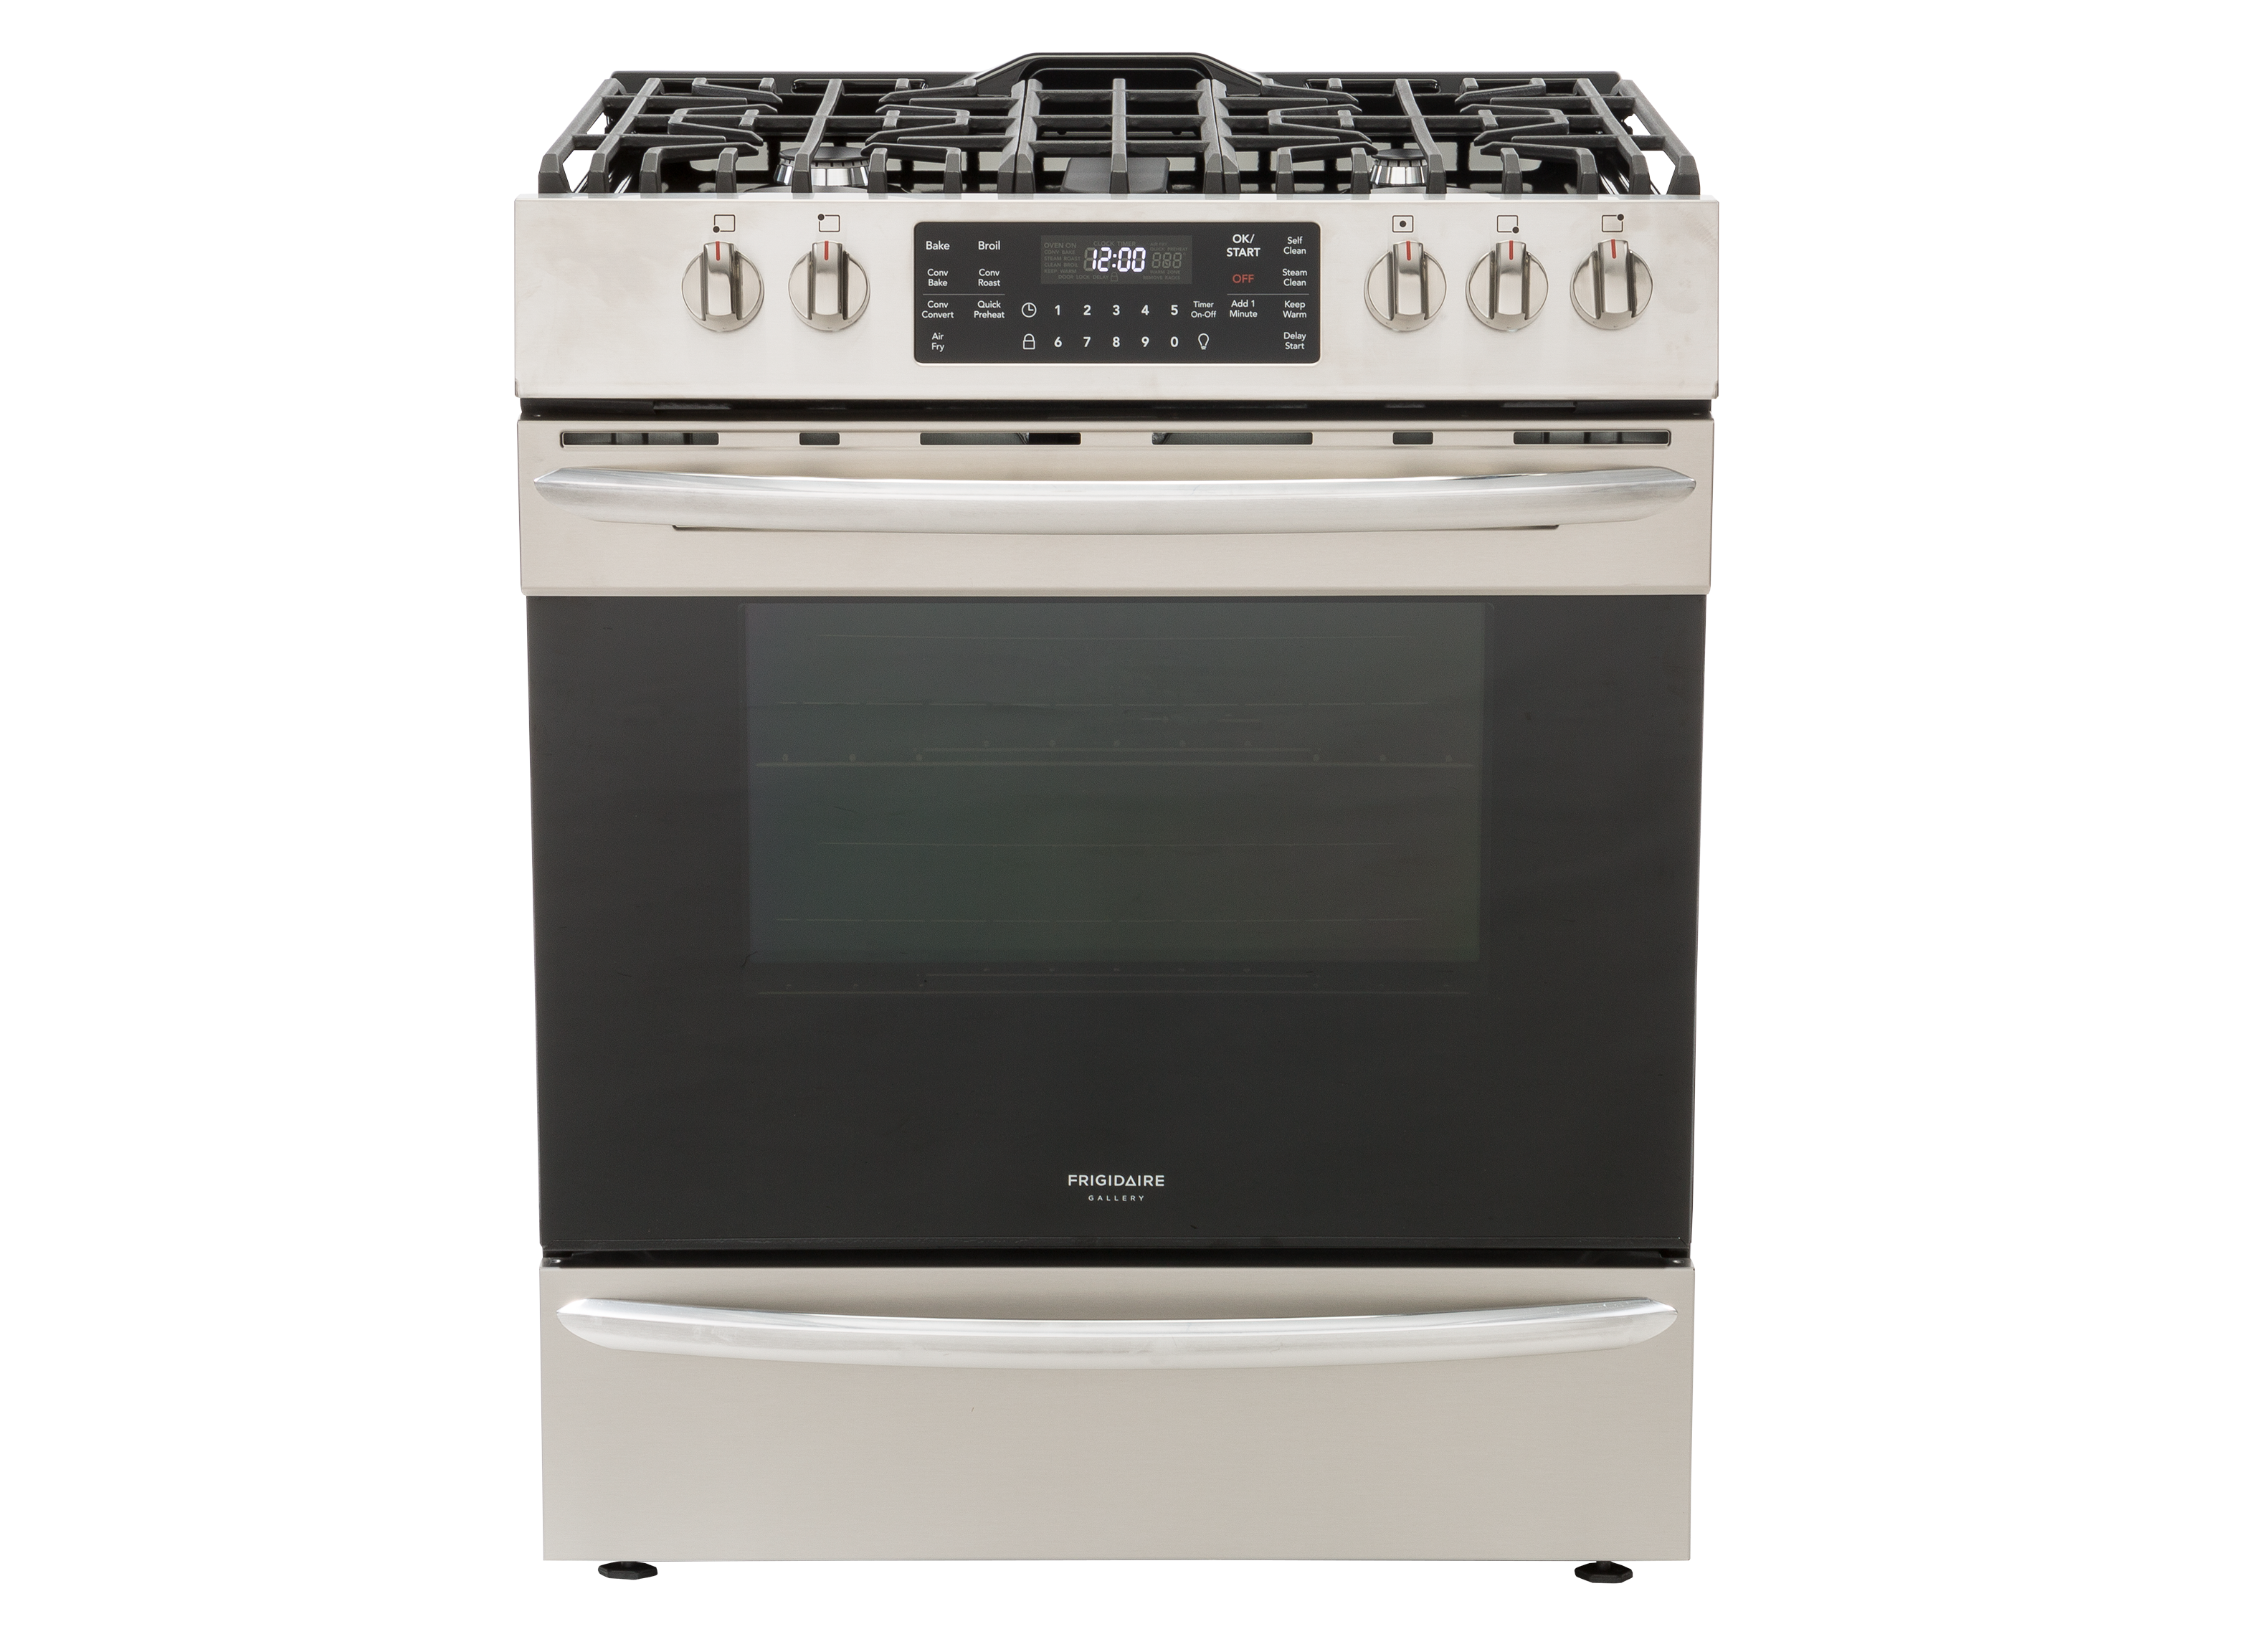 Frigidaire Gallery FGGH3047VF Gas Range Review - Reviewed